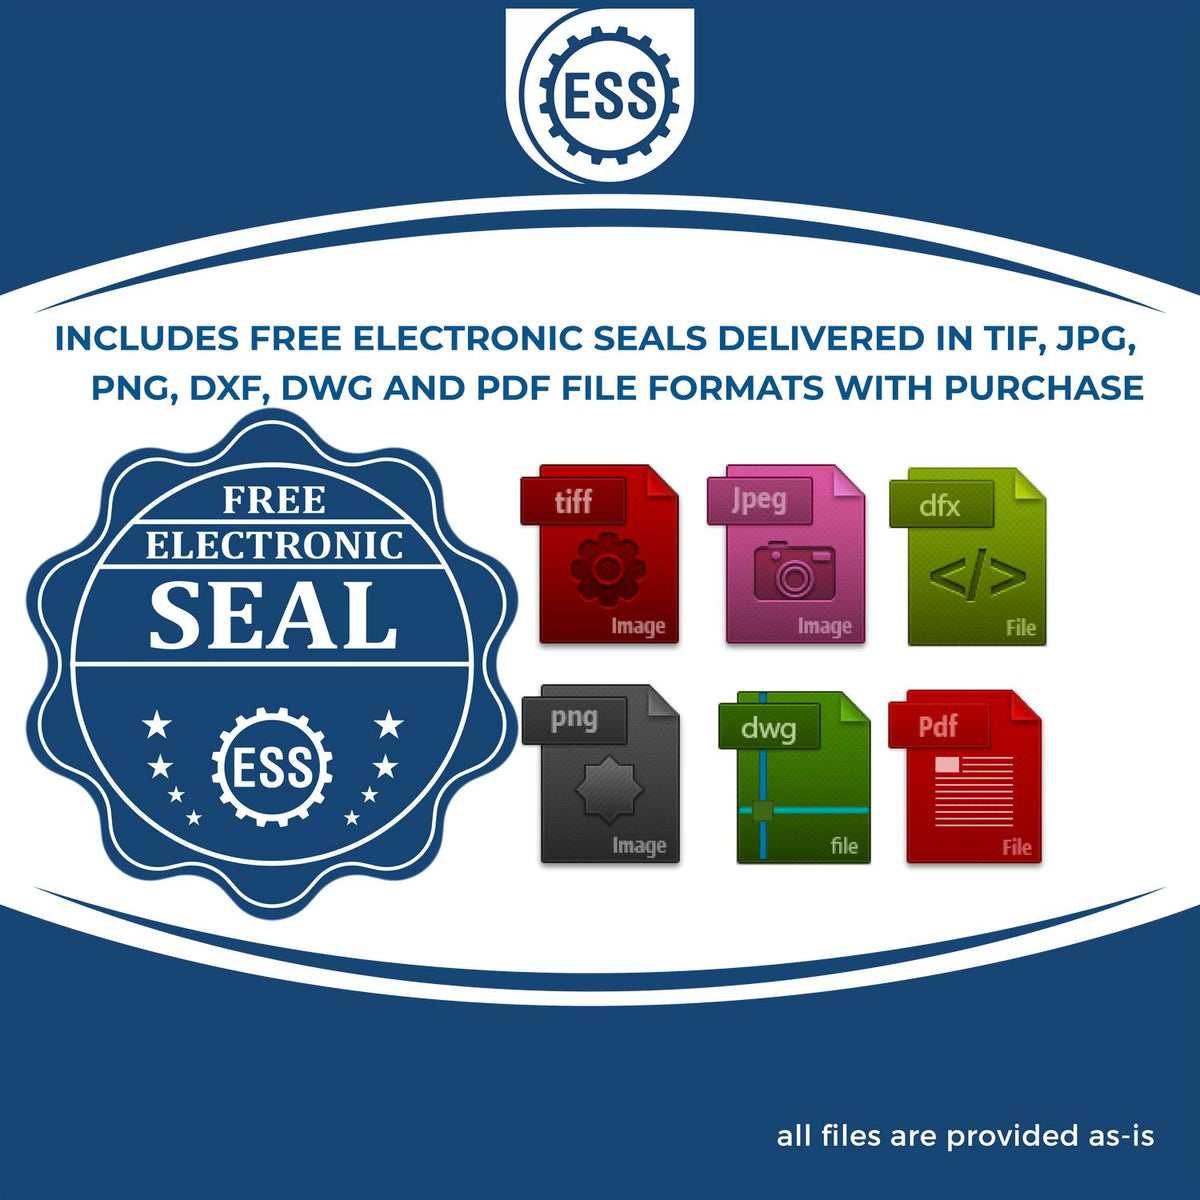 An infographic for the free electronic seal for the MaxLight Premium Pre-Inked Wisconsin State Seal Notarial Stamp illustrating the different file type icons such as DXF, DWG, TIF, JPG and PNG.